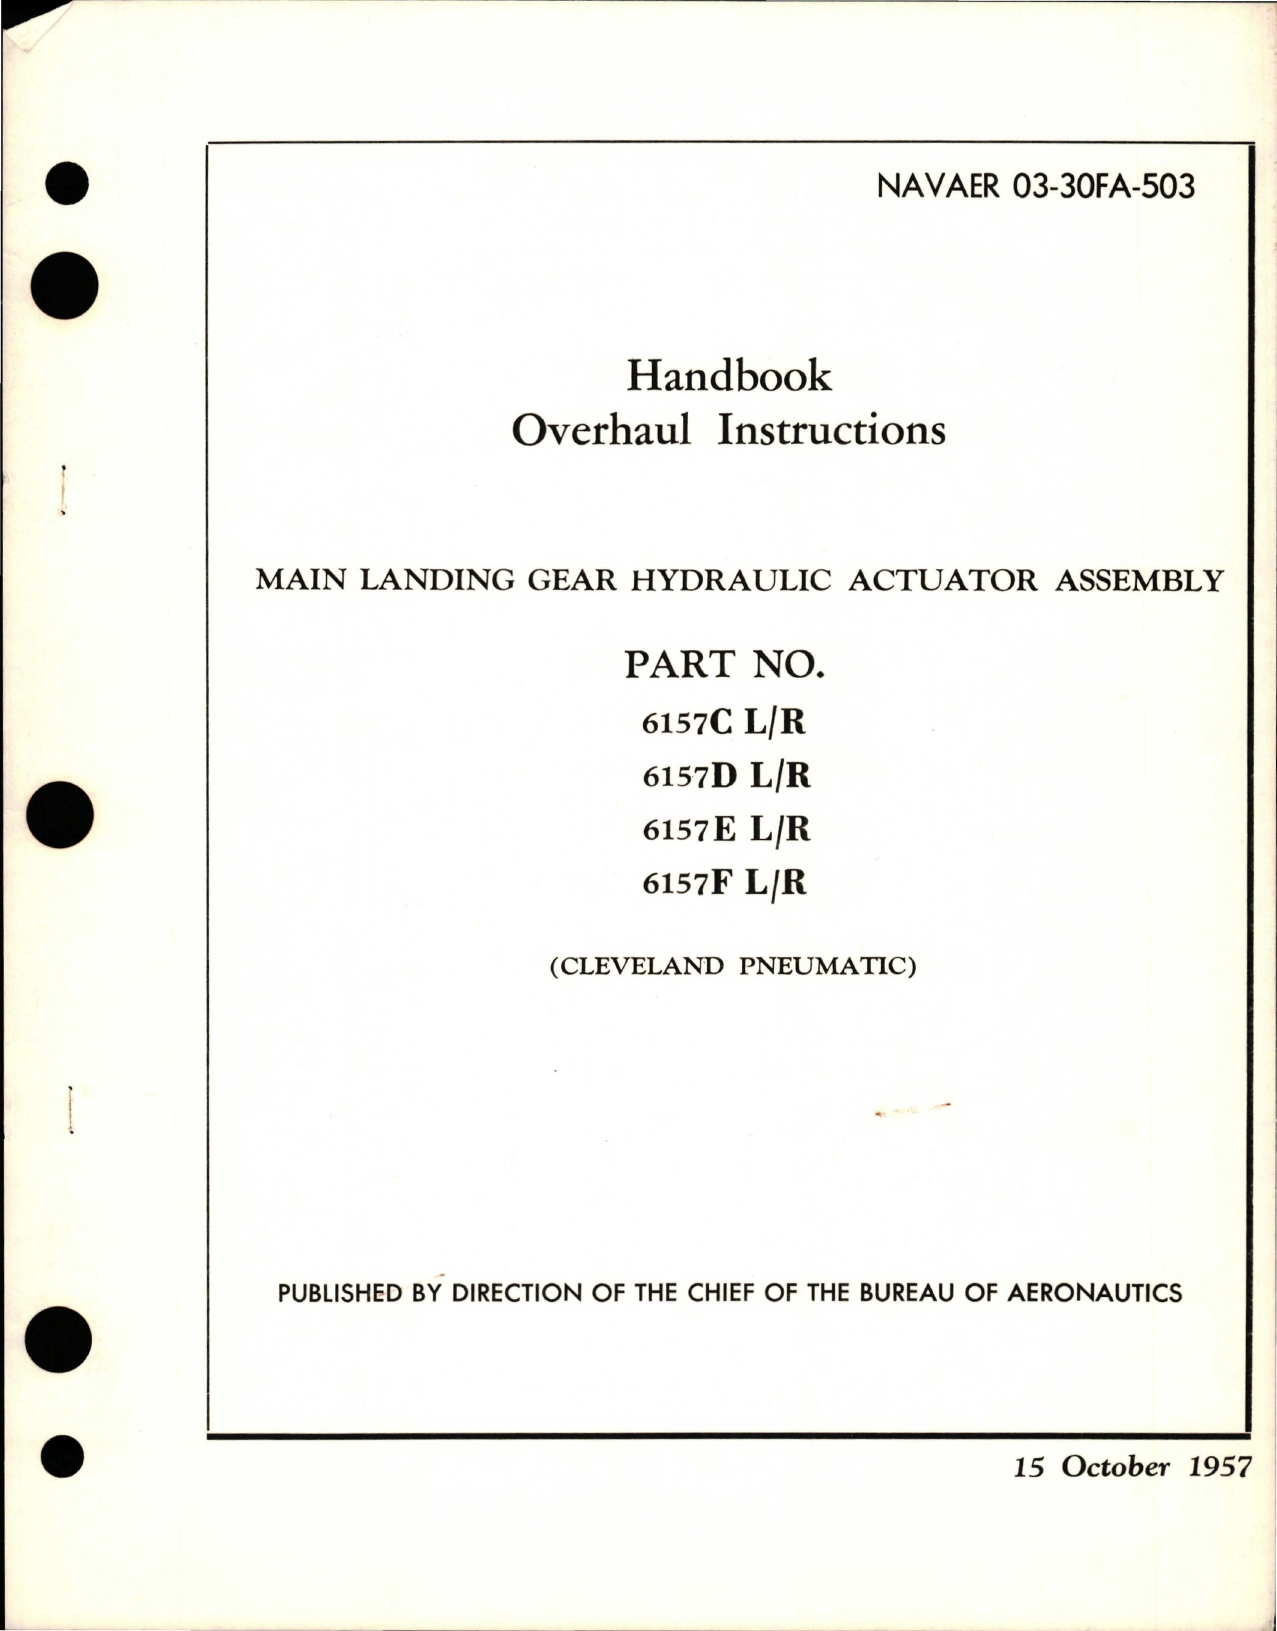 Sample page 1 from AirCorps Library document: Overhaul Instructions for Main Landing Gear Hydraulic Actuator Assembly - Parts 6157C L-R, 6157D L-R, 6157E L-R, and 6157F L-R